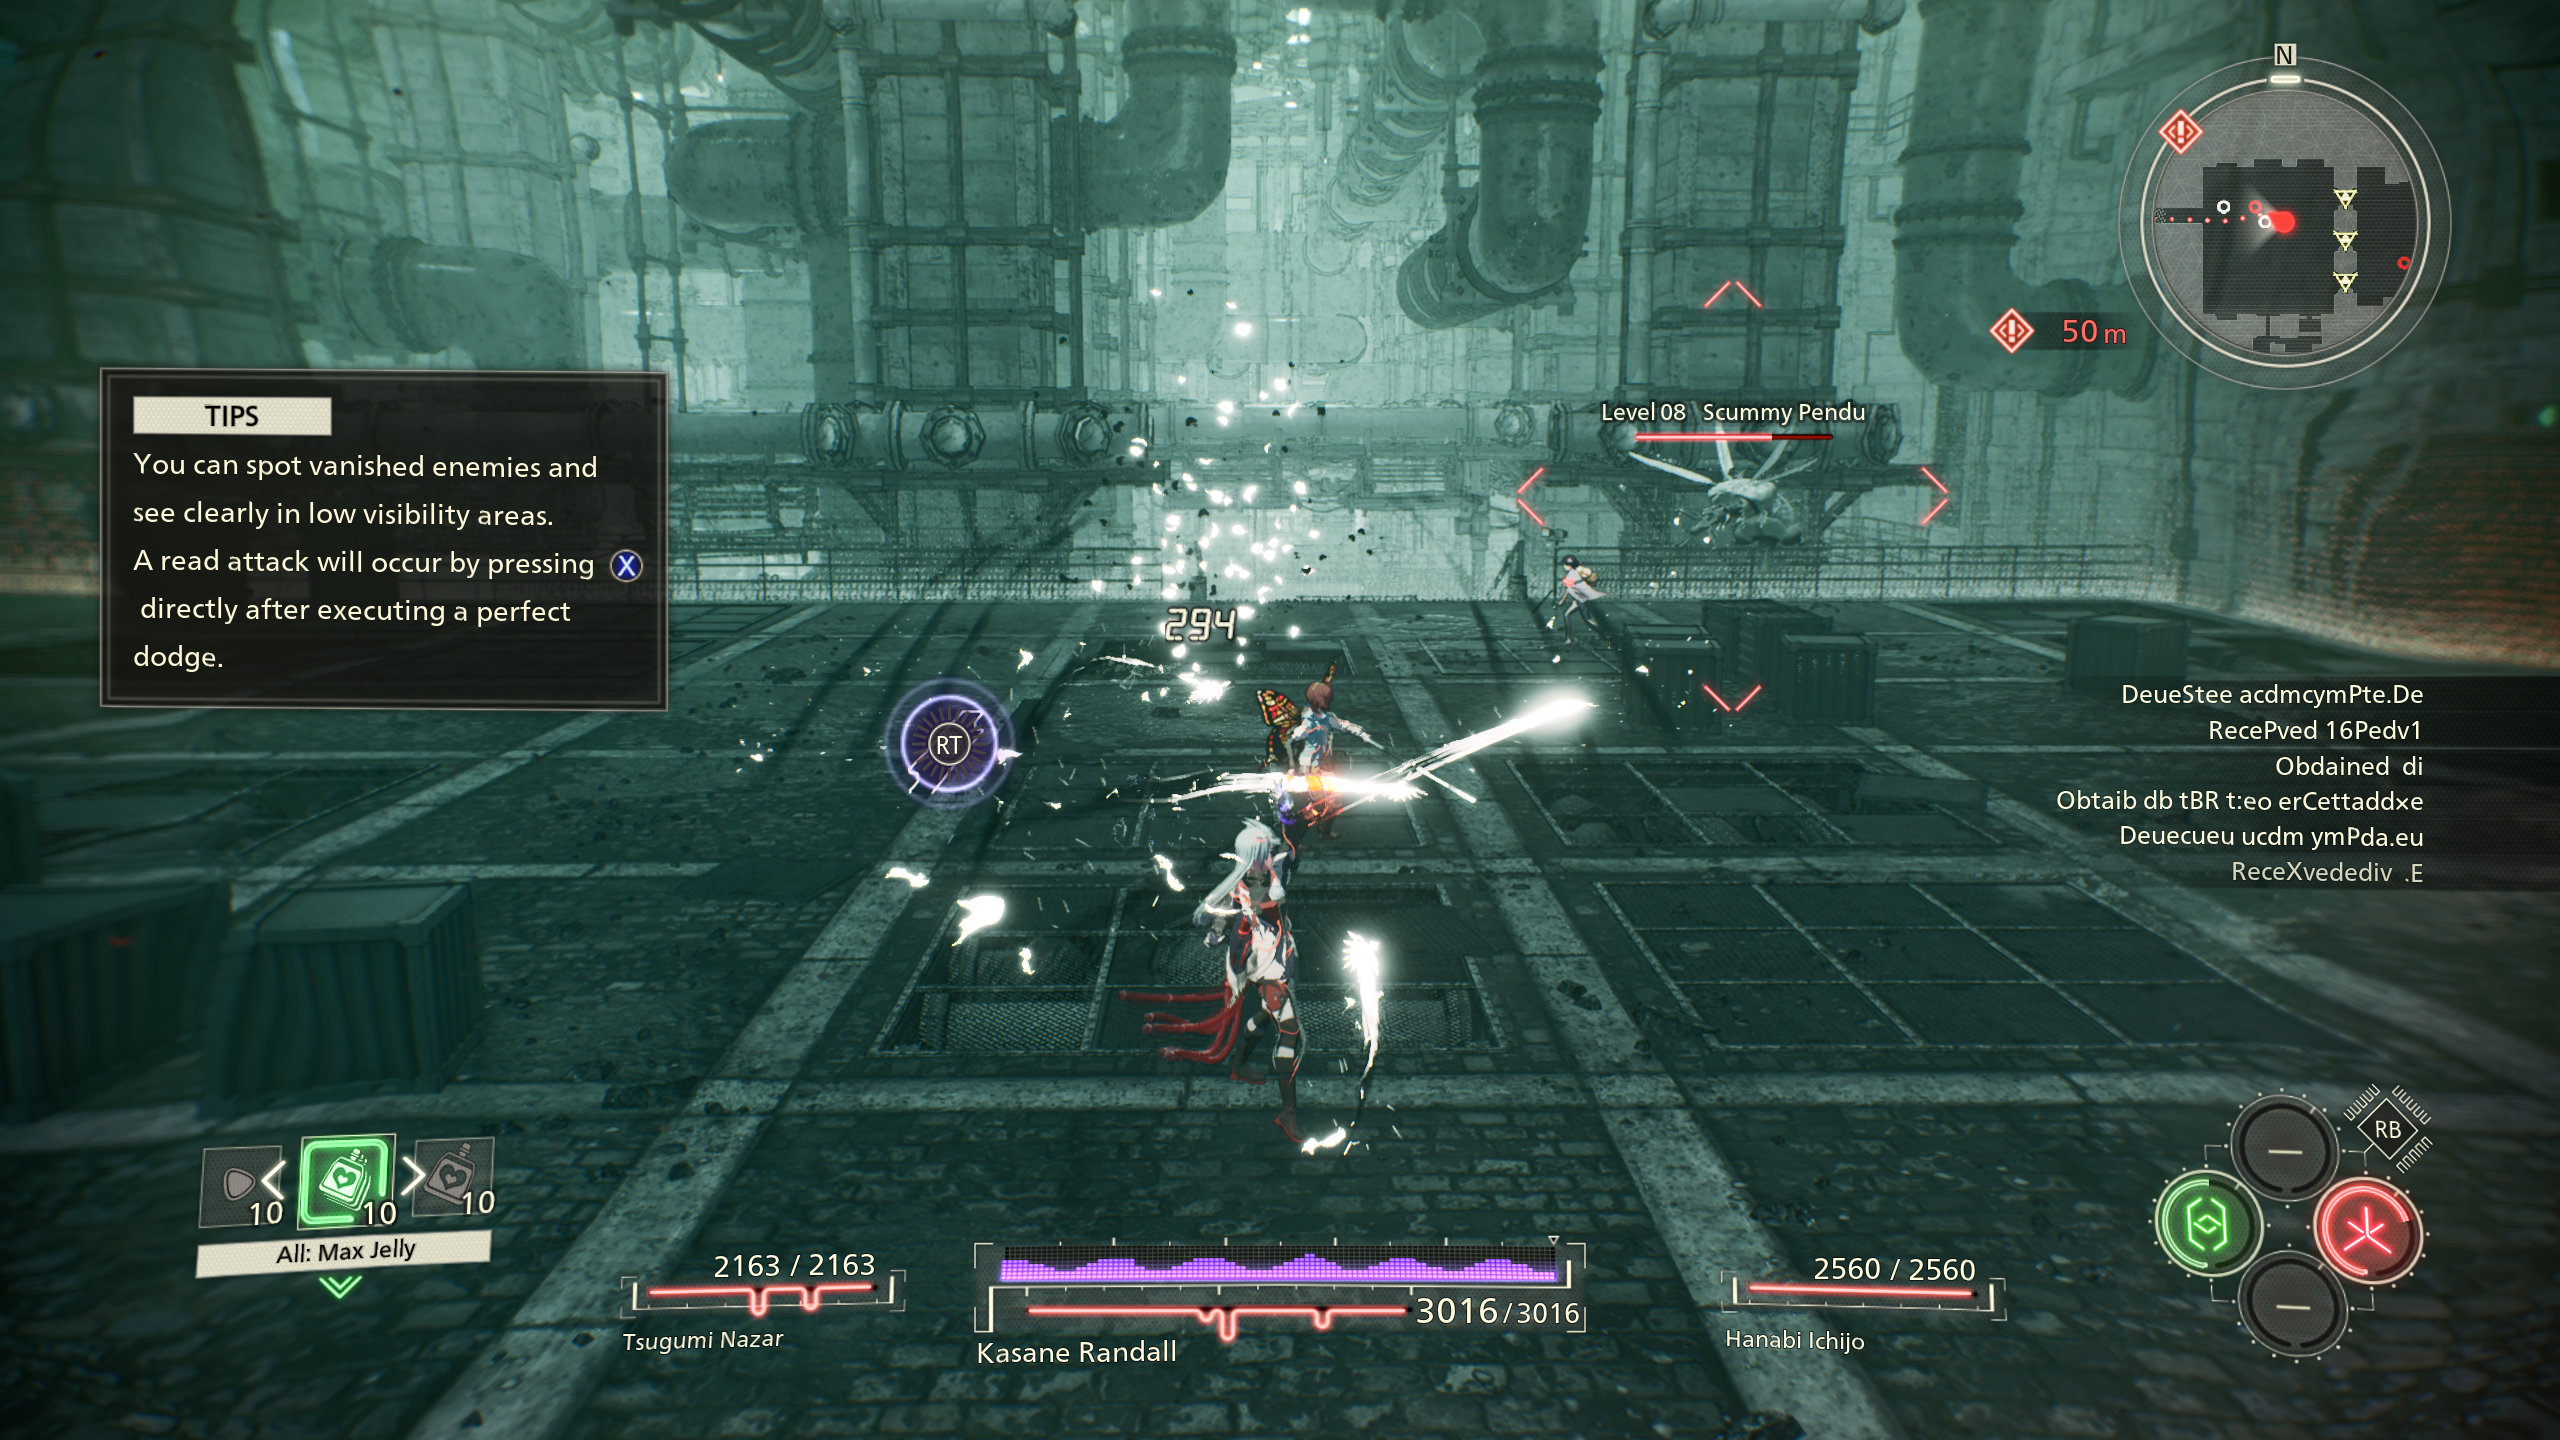 Scarlet Nexus Trailer Offers the Lowdown on Story and Gameplay